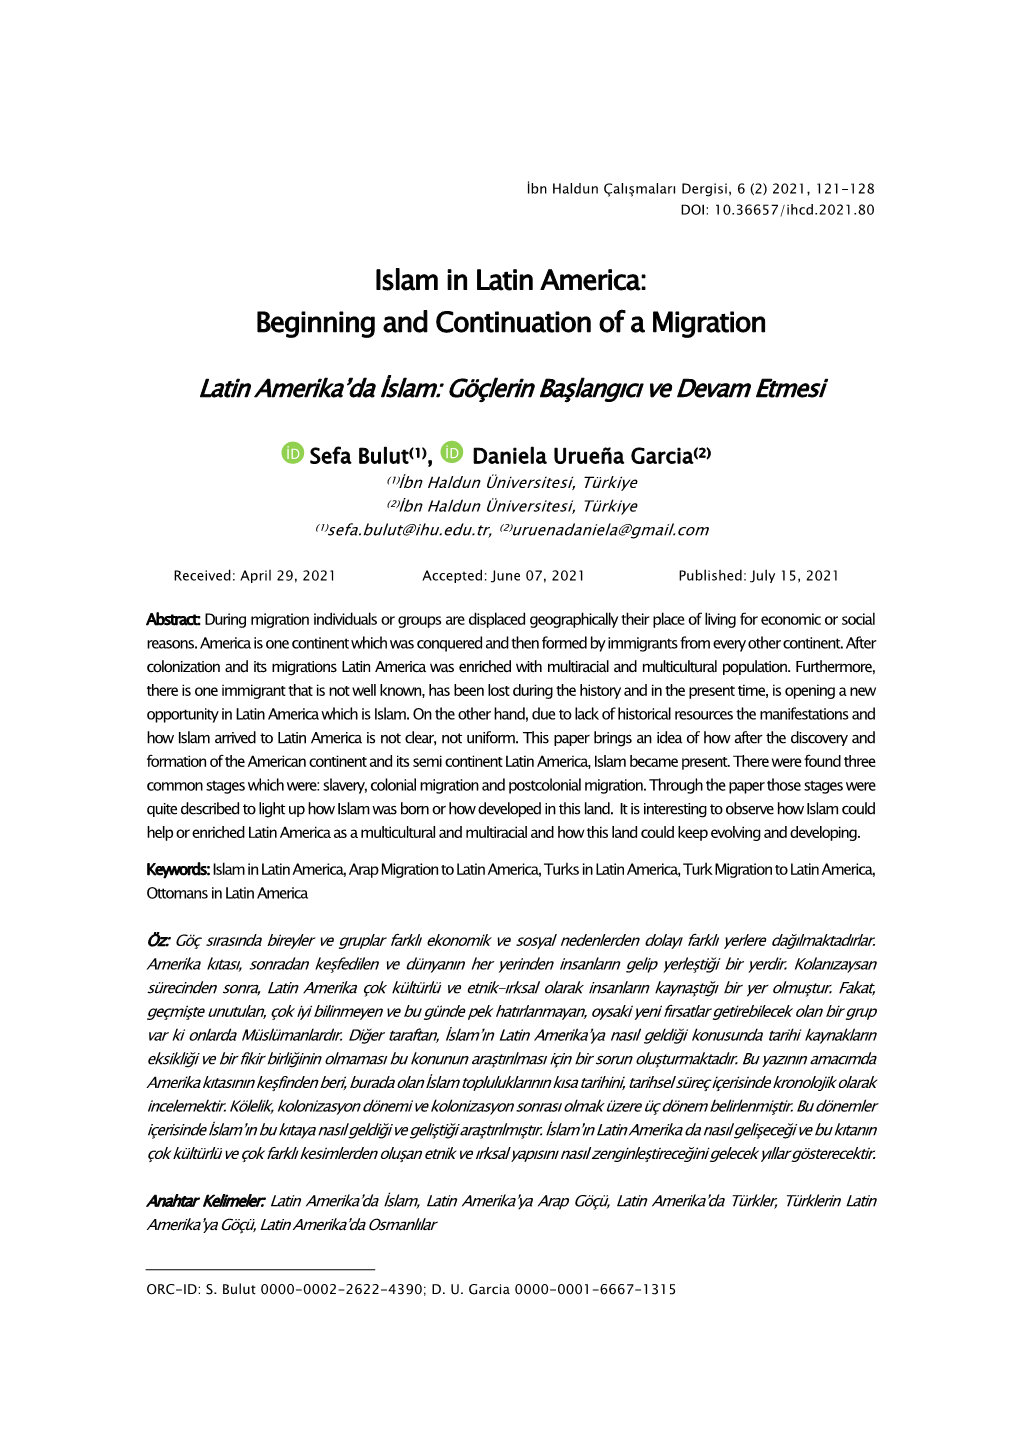 Islam in Latin America: Beginning and Continuation of a Migration